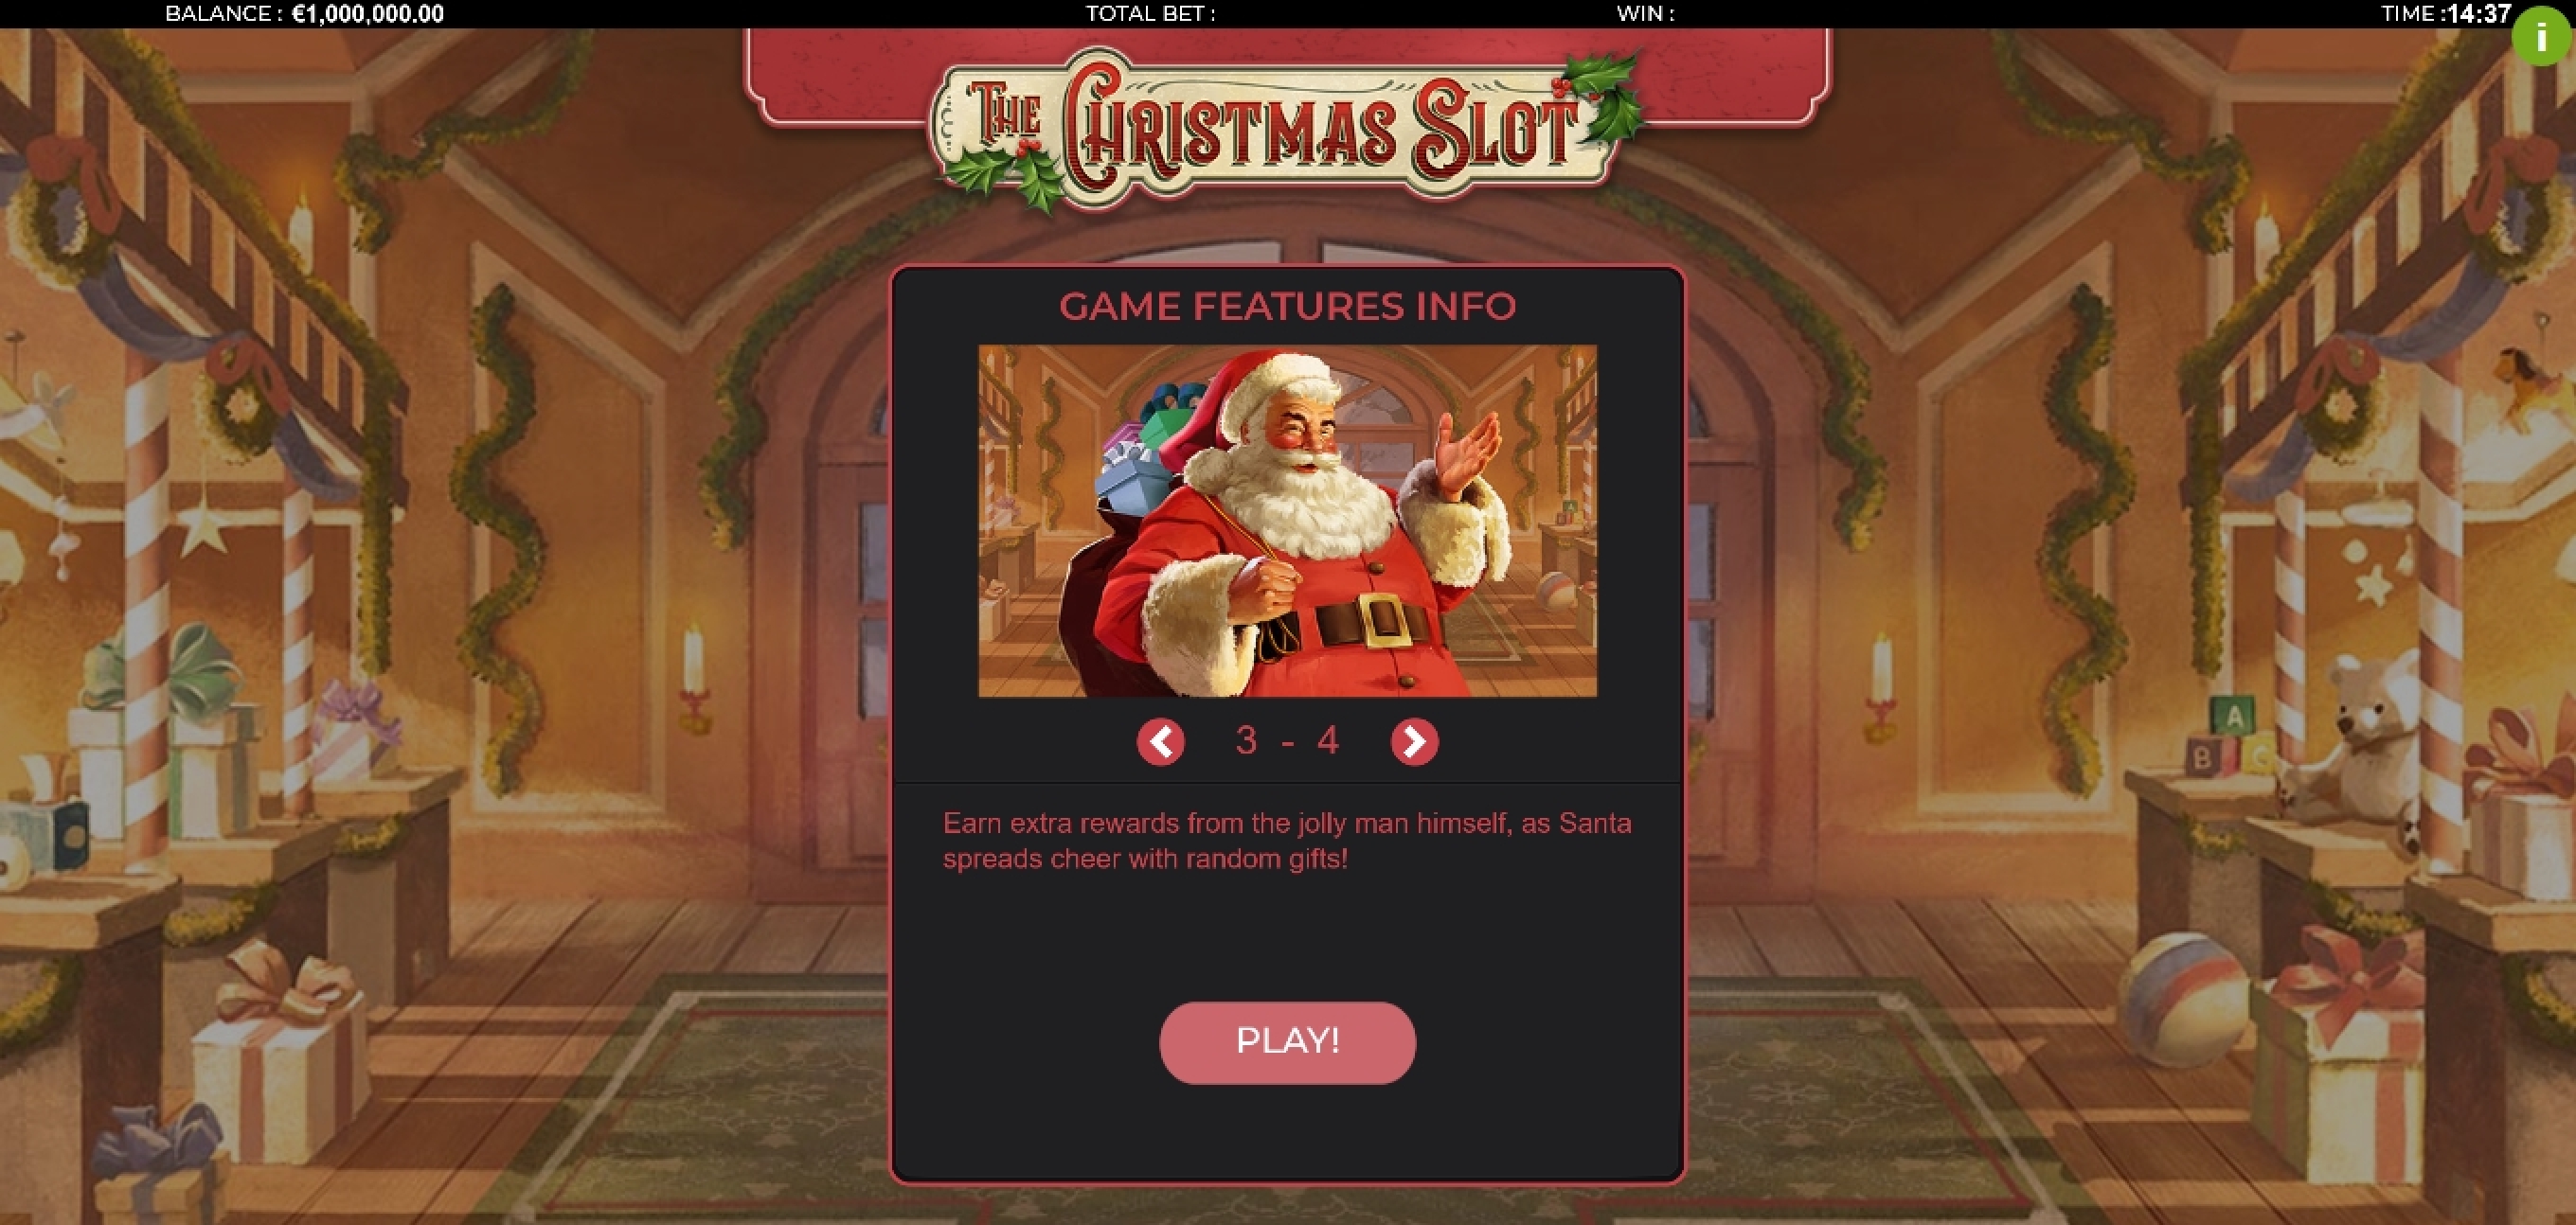 Play The Christmas Slot Free Casino Slot Game by Green Jade Games